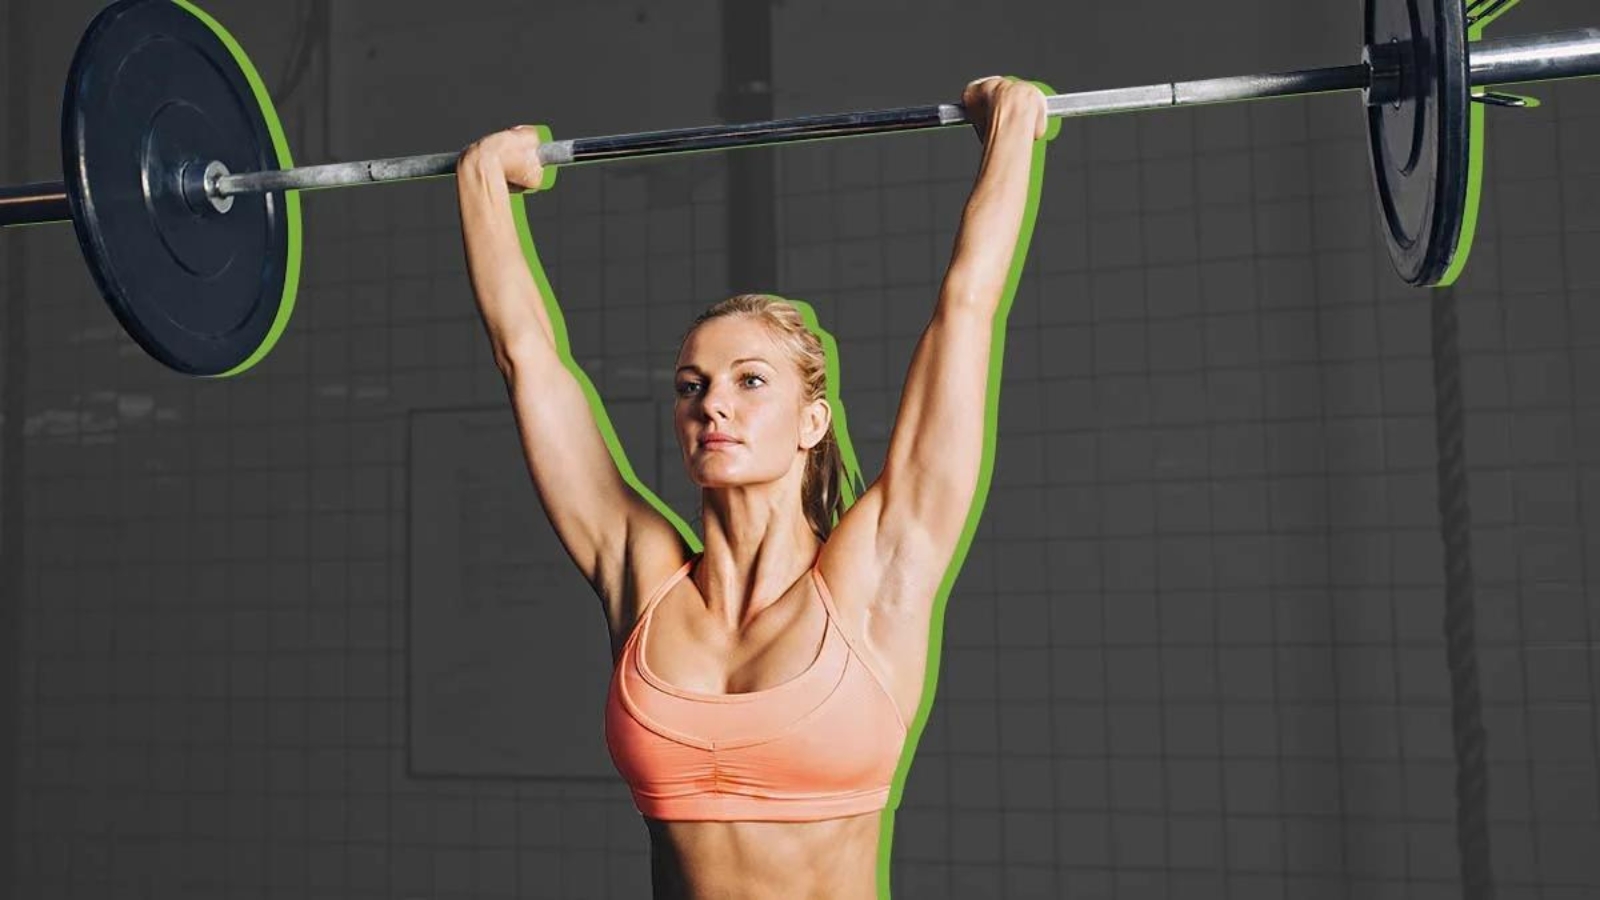 4 empty barbell exercises for building strength and stability